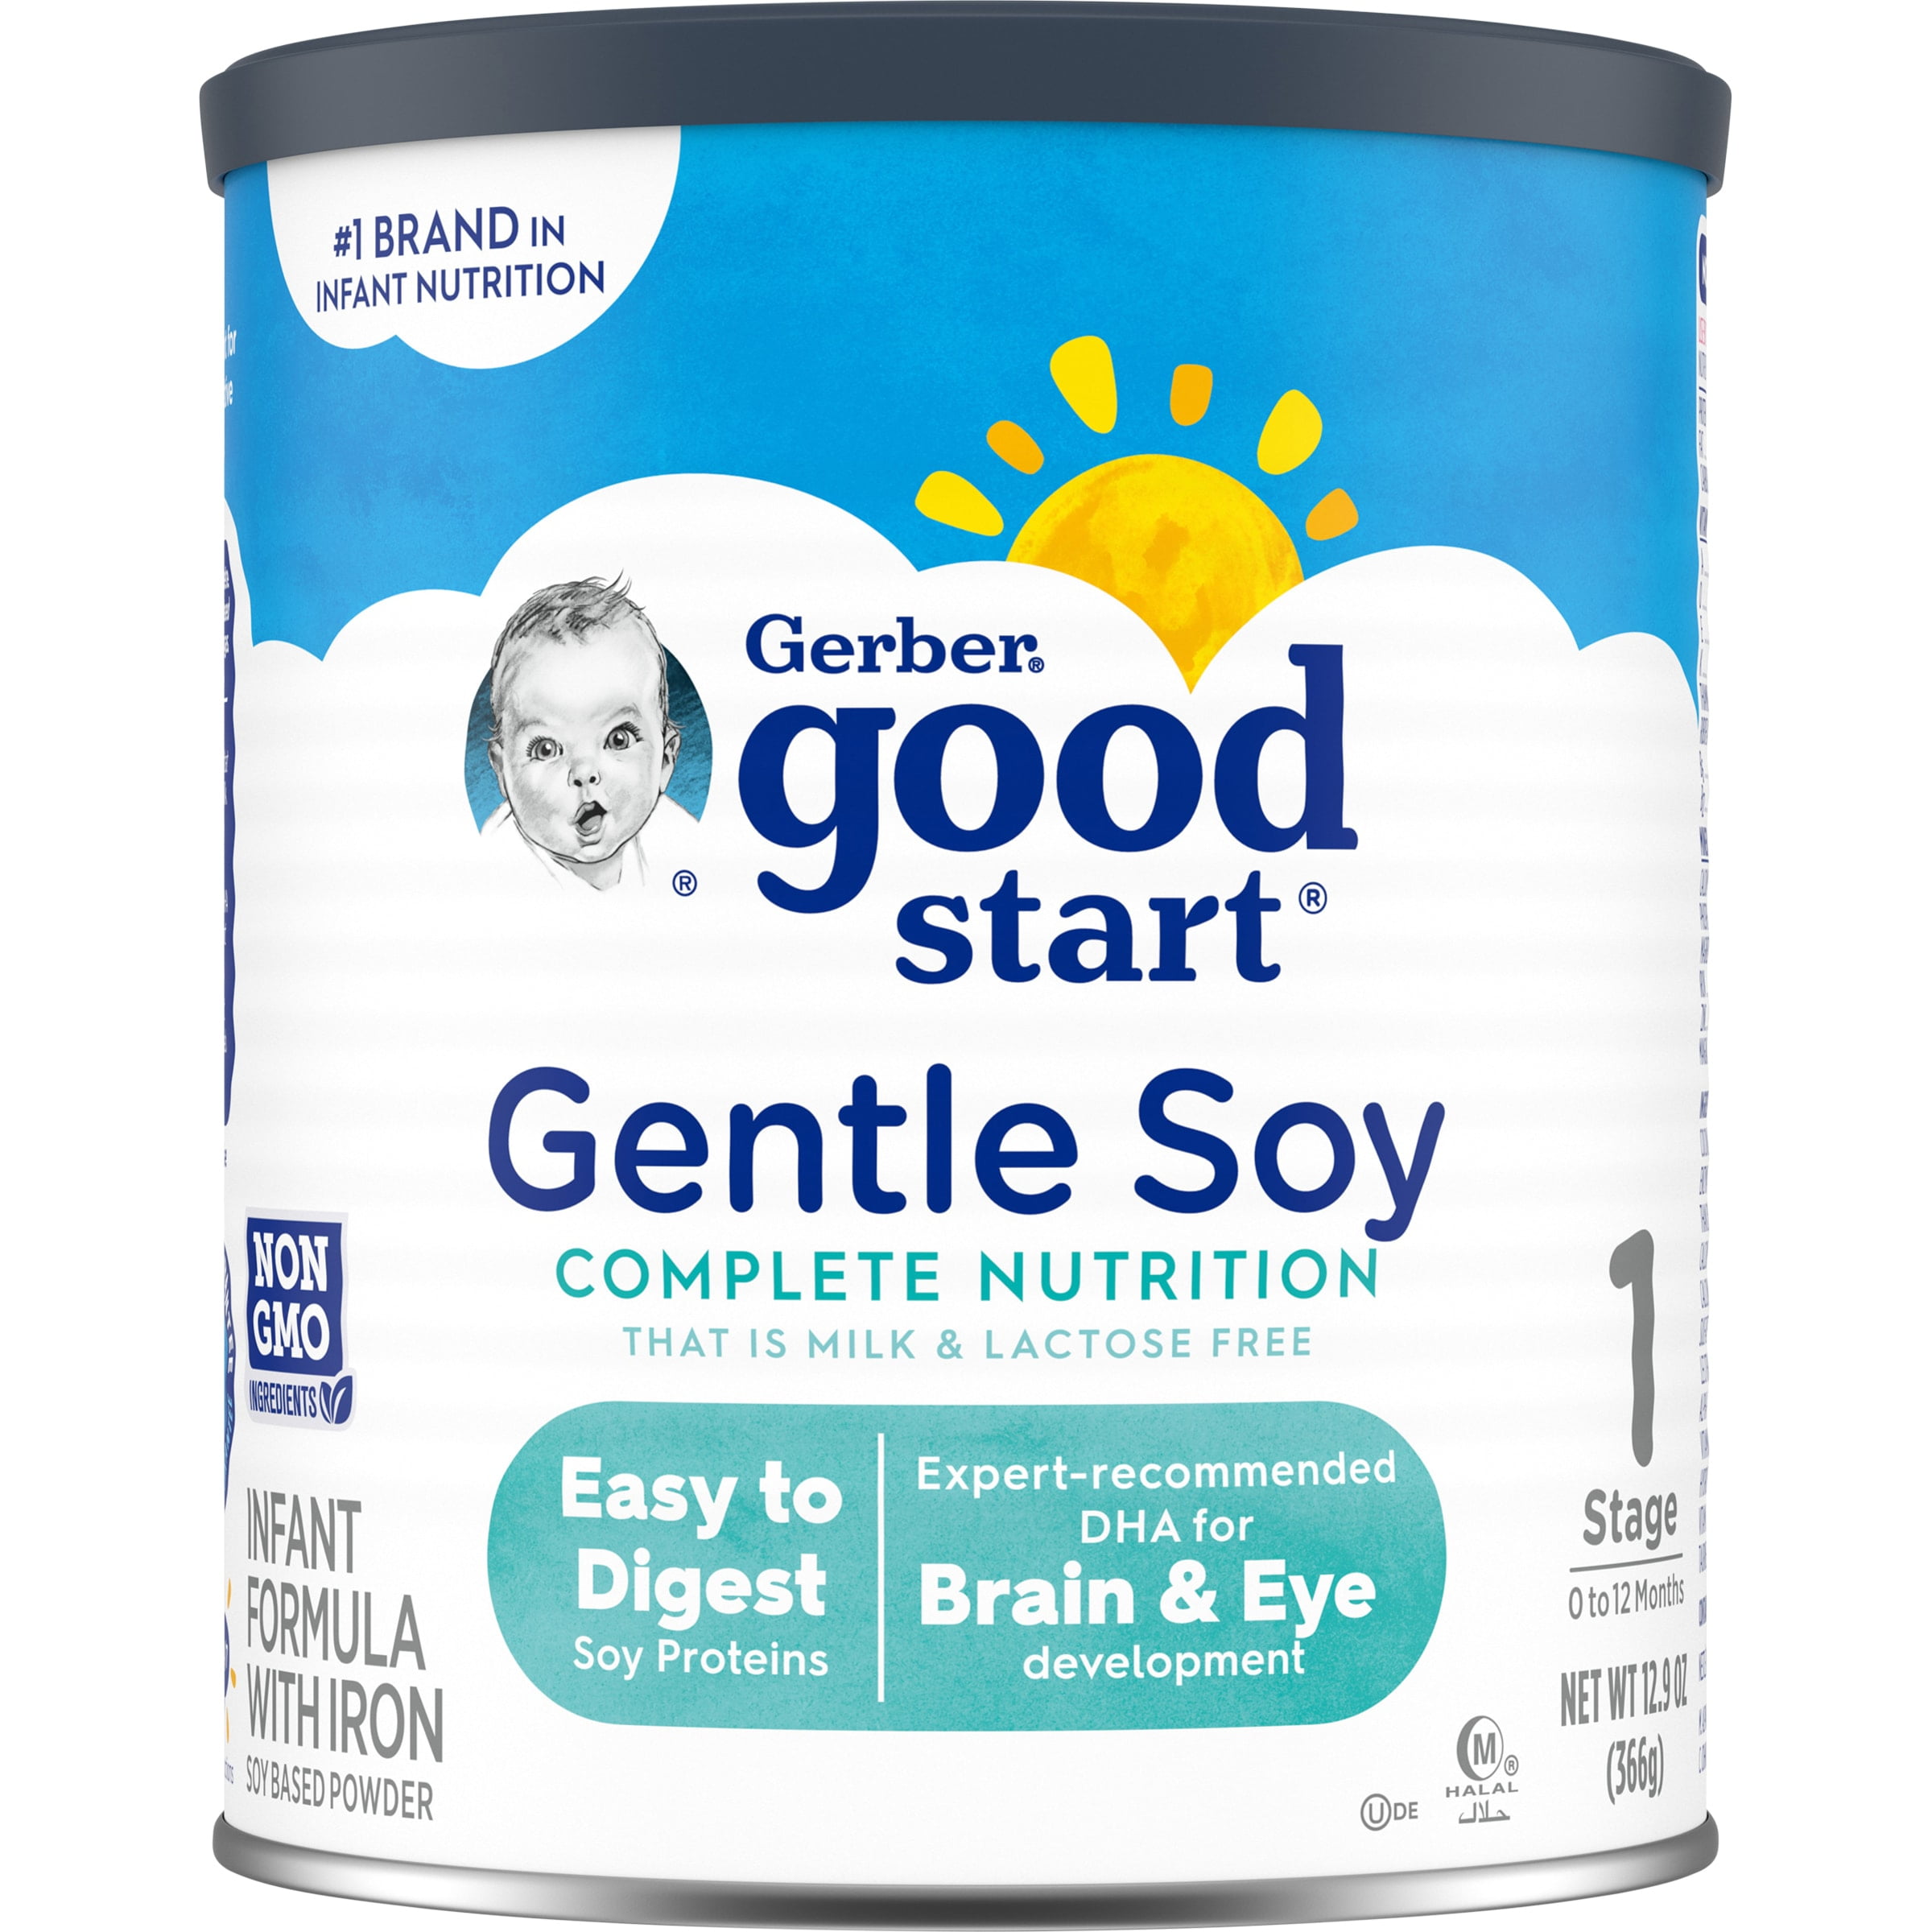 Gerber Good Start Gentle Soy Lactose-Free Non-GMO Powder Baby Formula with Iron, 12.9 oz Canister